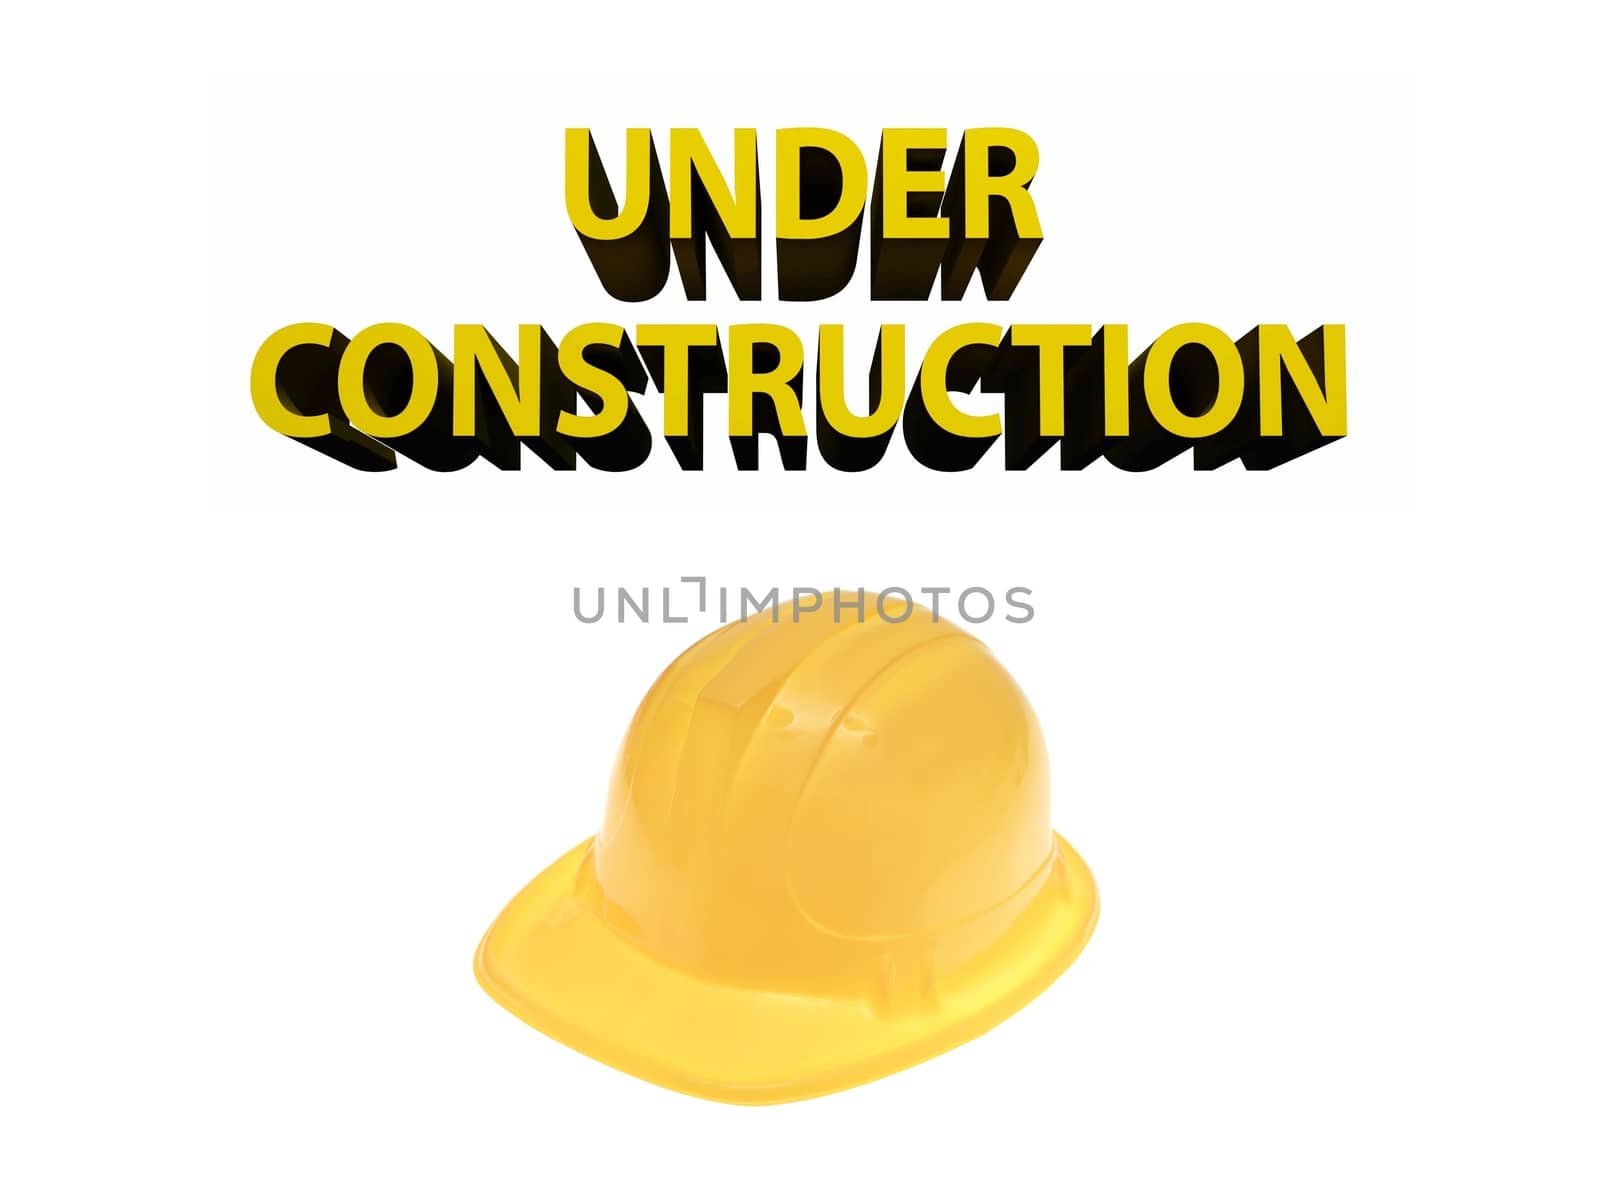 Under Construction by Kitch